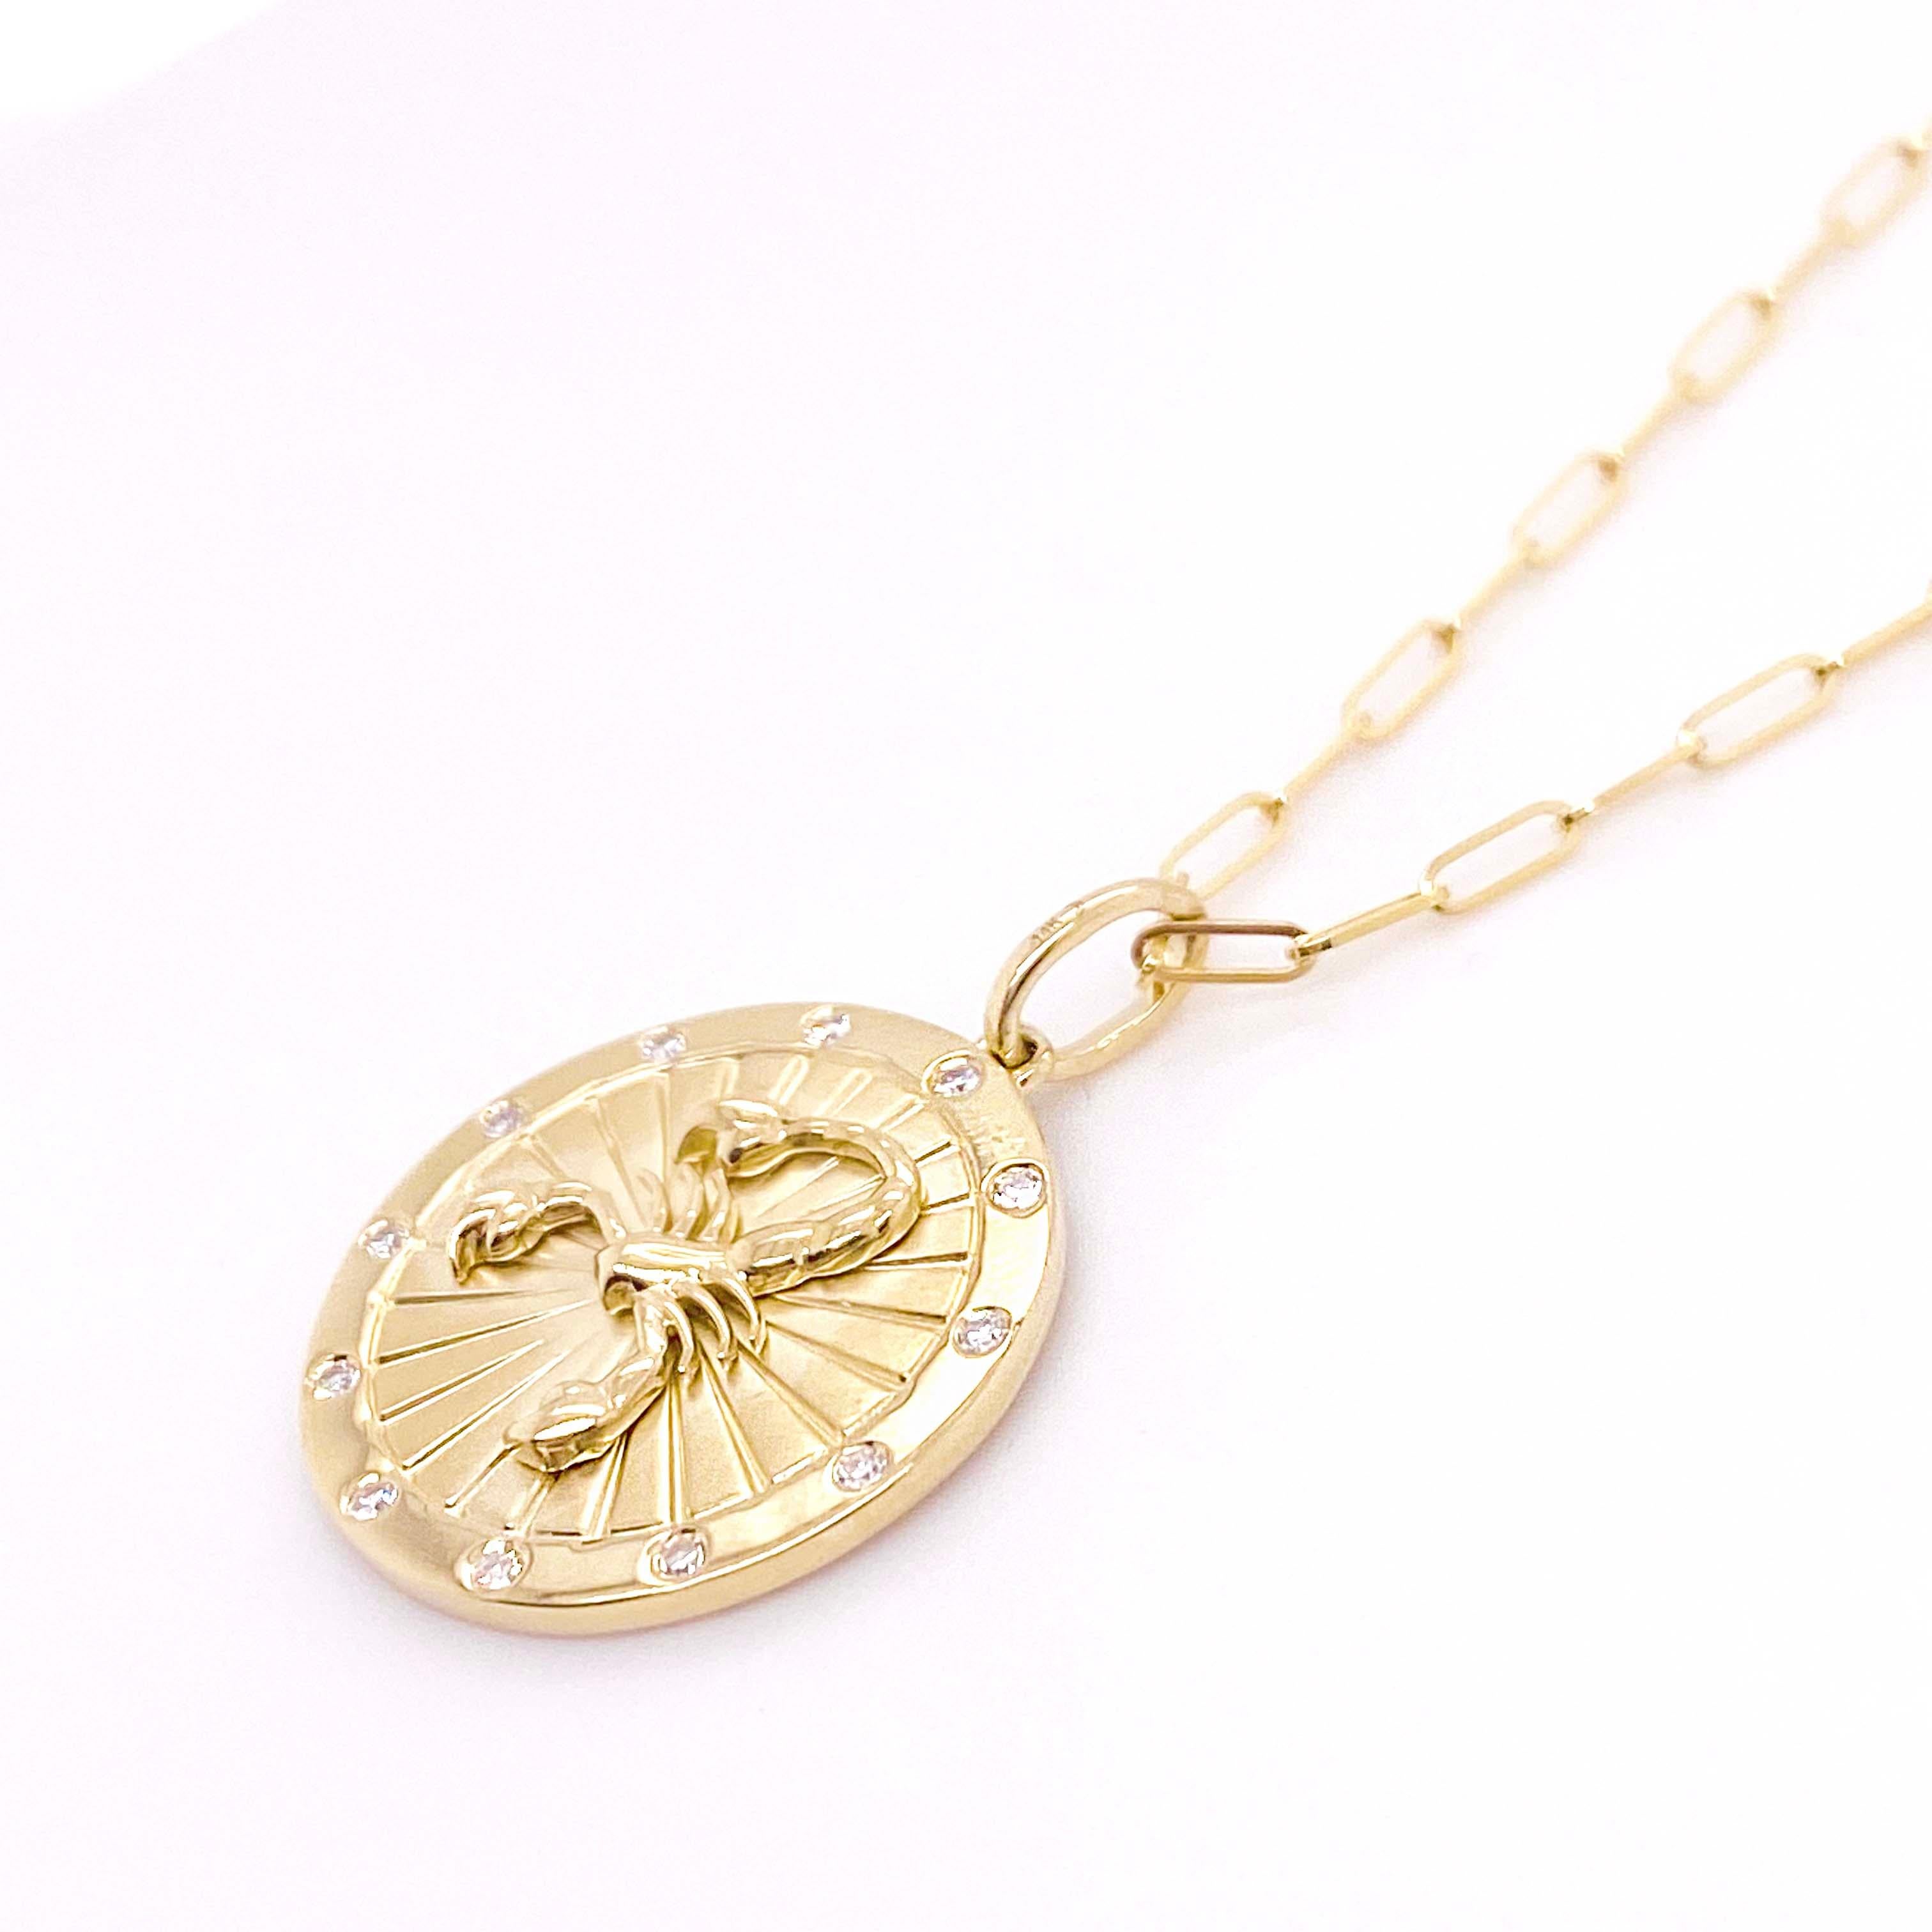 This zodiac pendant can be ordered for any month. This one showing is a scorpio is the sign of passion, creativity, and mystery, but you don't have to be born a scorpio to love this necklace. The flush-set diamonds all around the circumference of